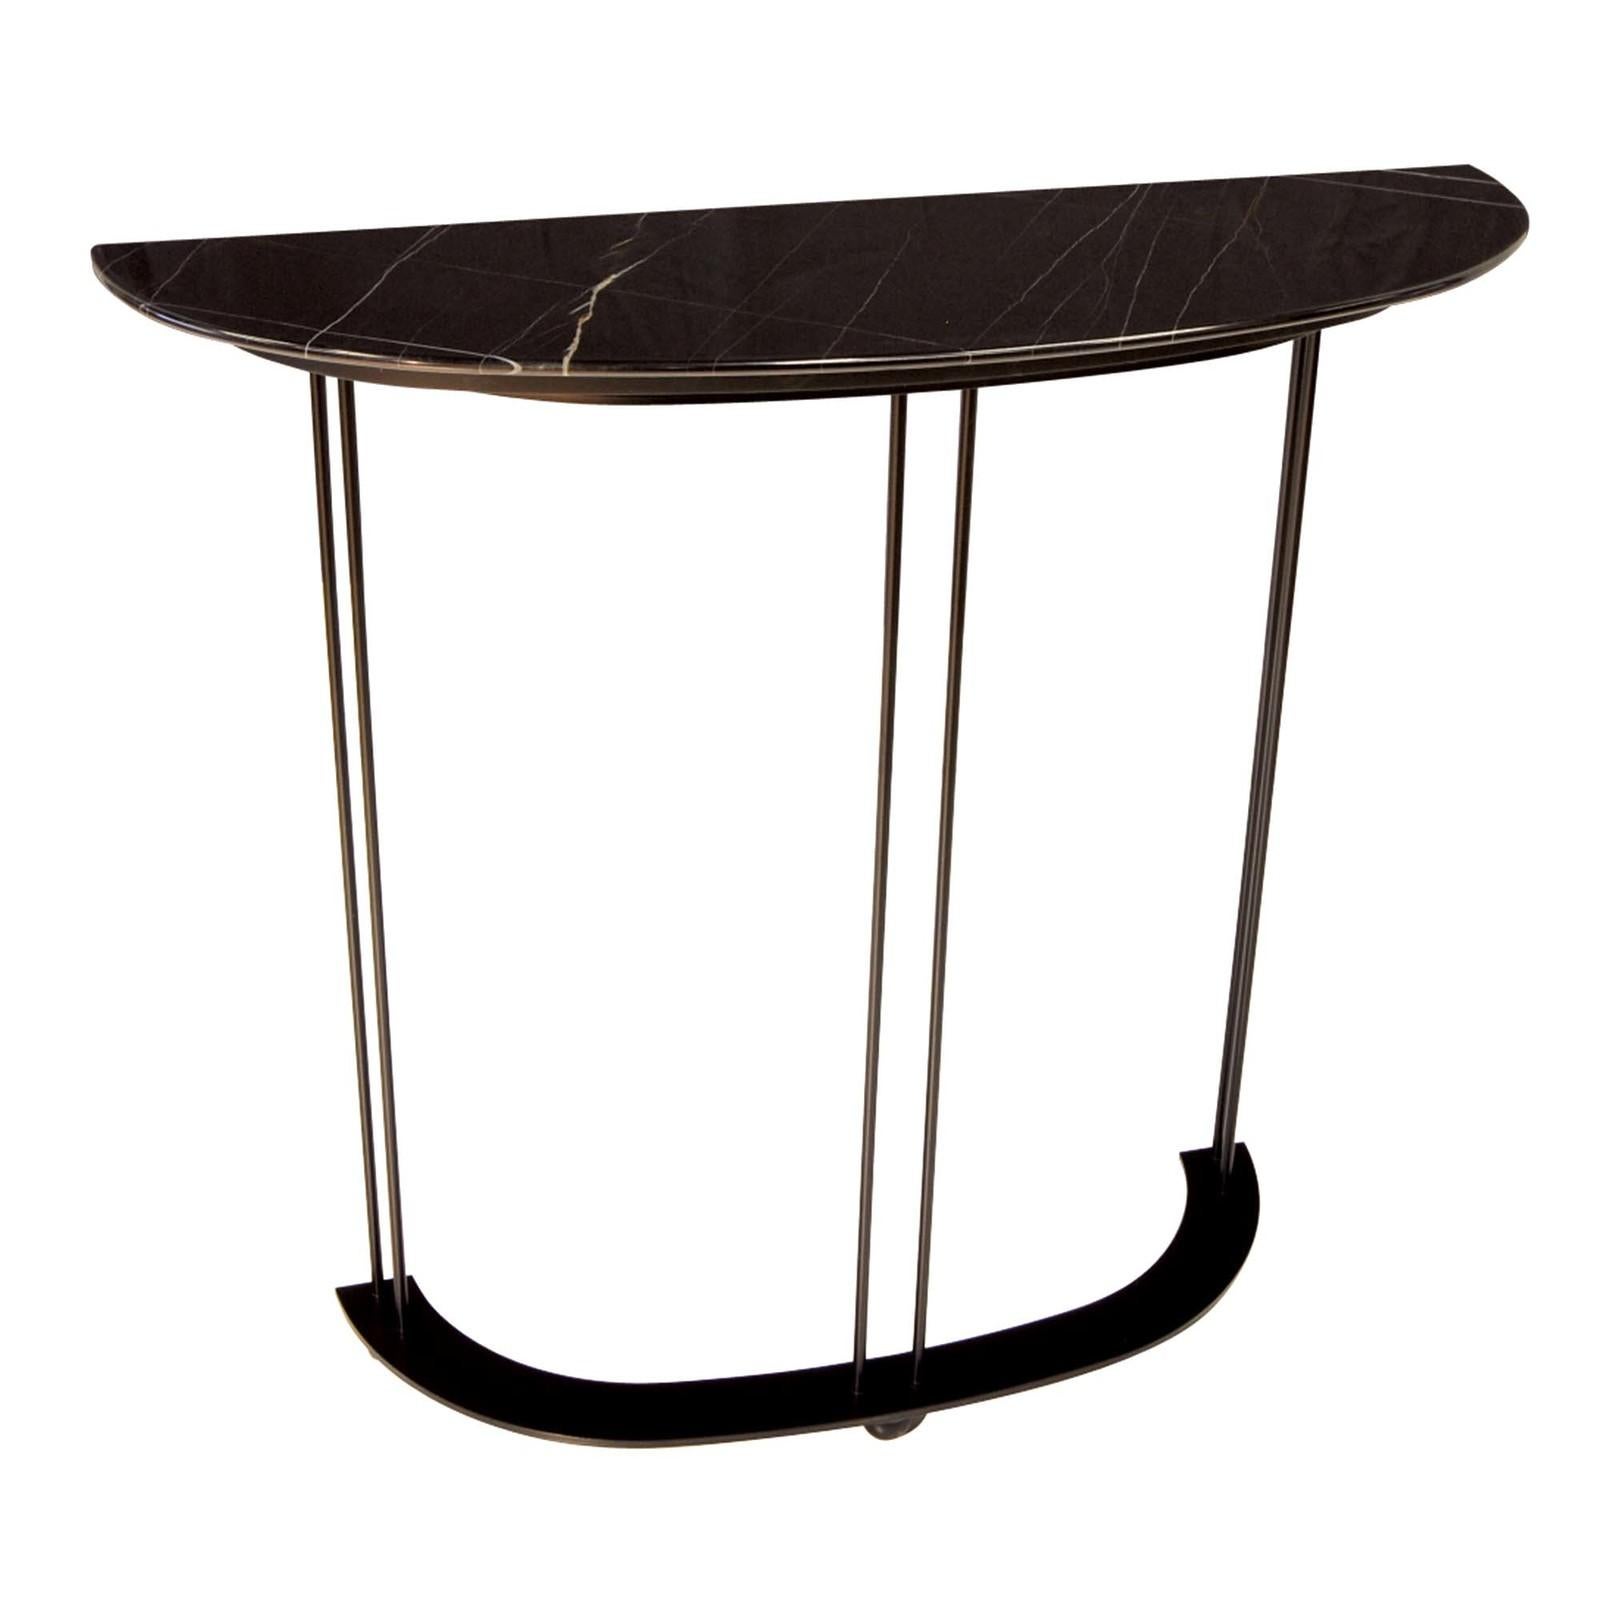 Defined by a sleek and timeless design, this striking tall console boasts a demilune profile with a top in black Nero Guinea, distinctive for its vibrant and dynamic veining. The three column-like legs with a matte black powder coating connect to a